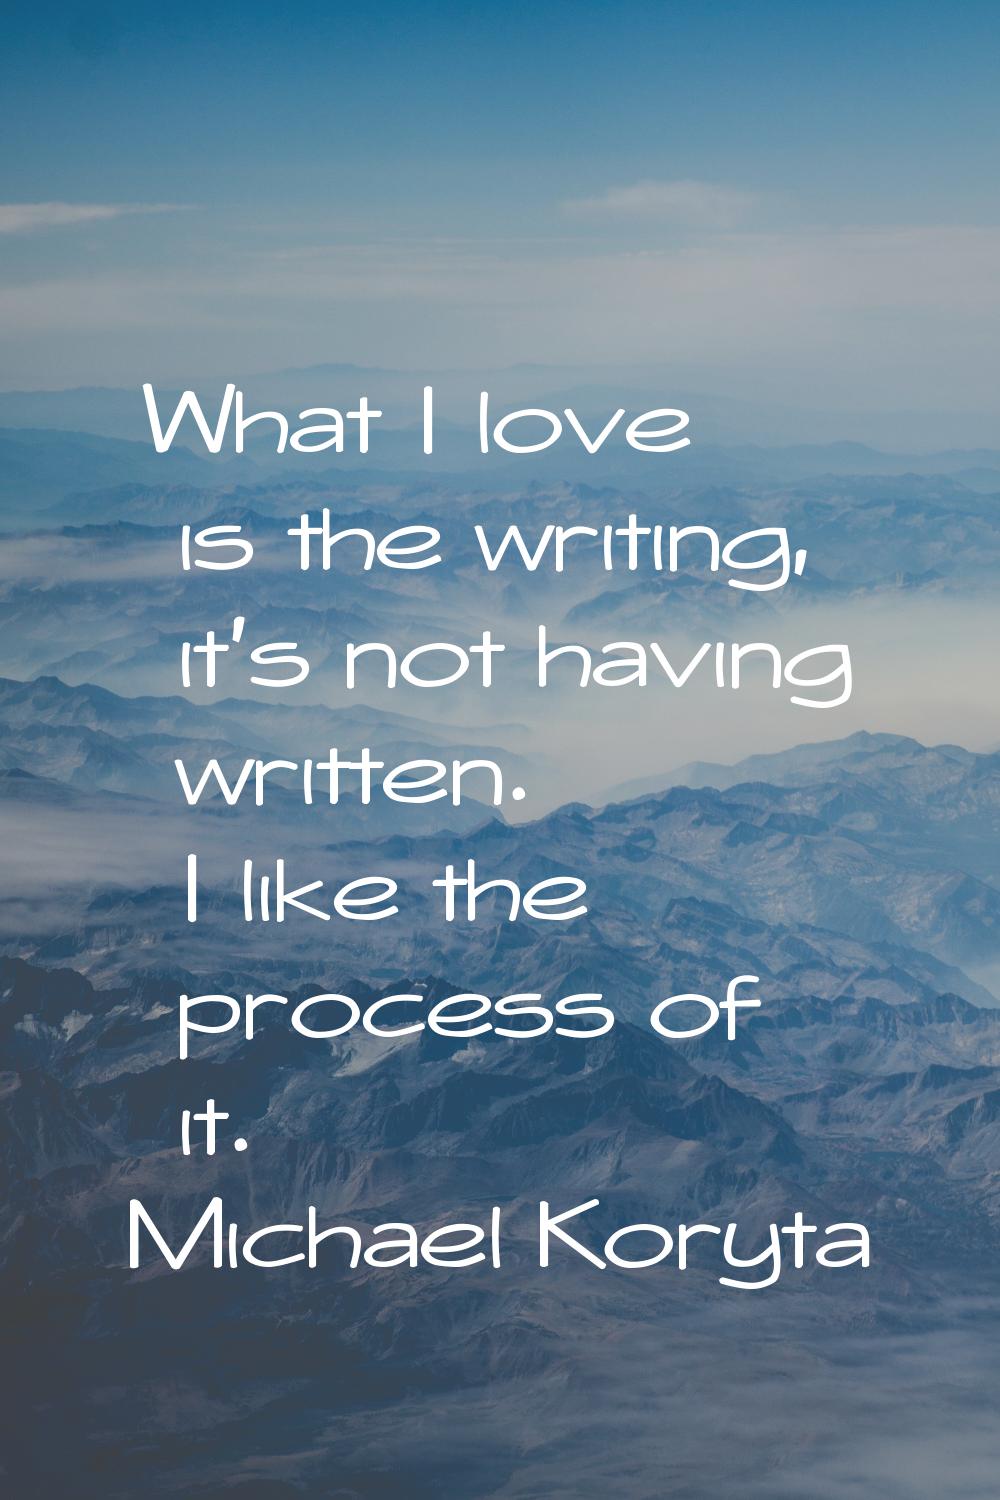 What I love is the writing, it's not having written. I like the process of it.